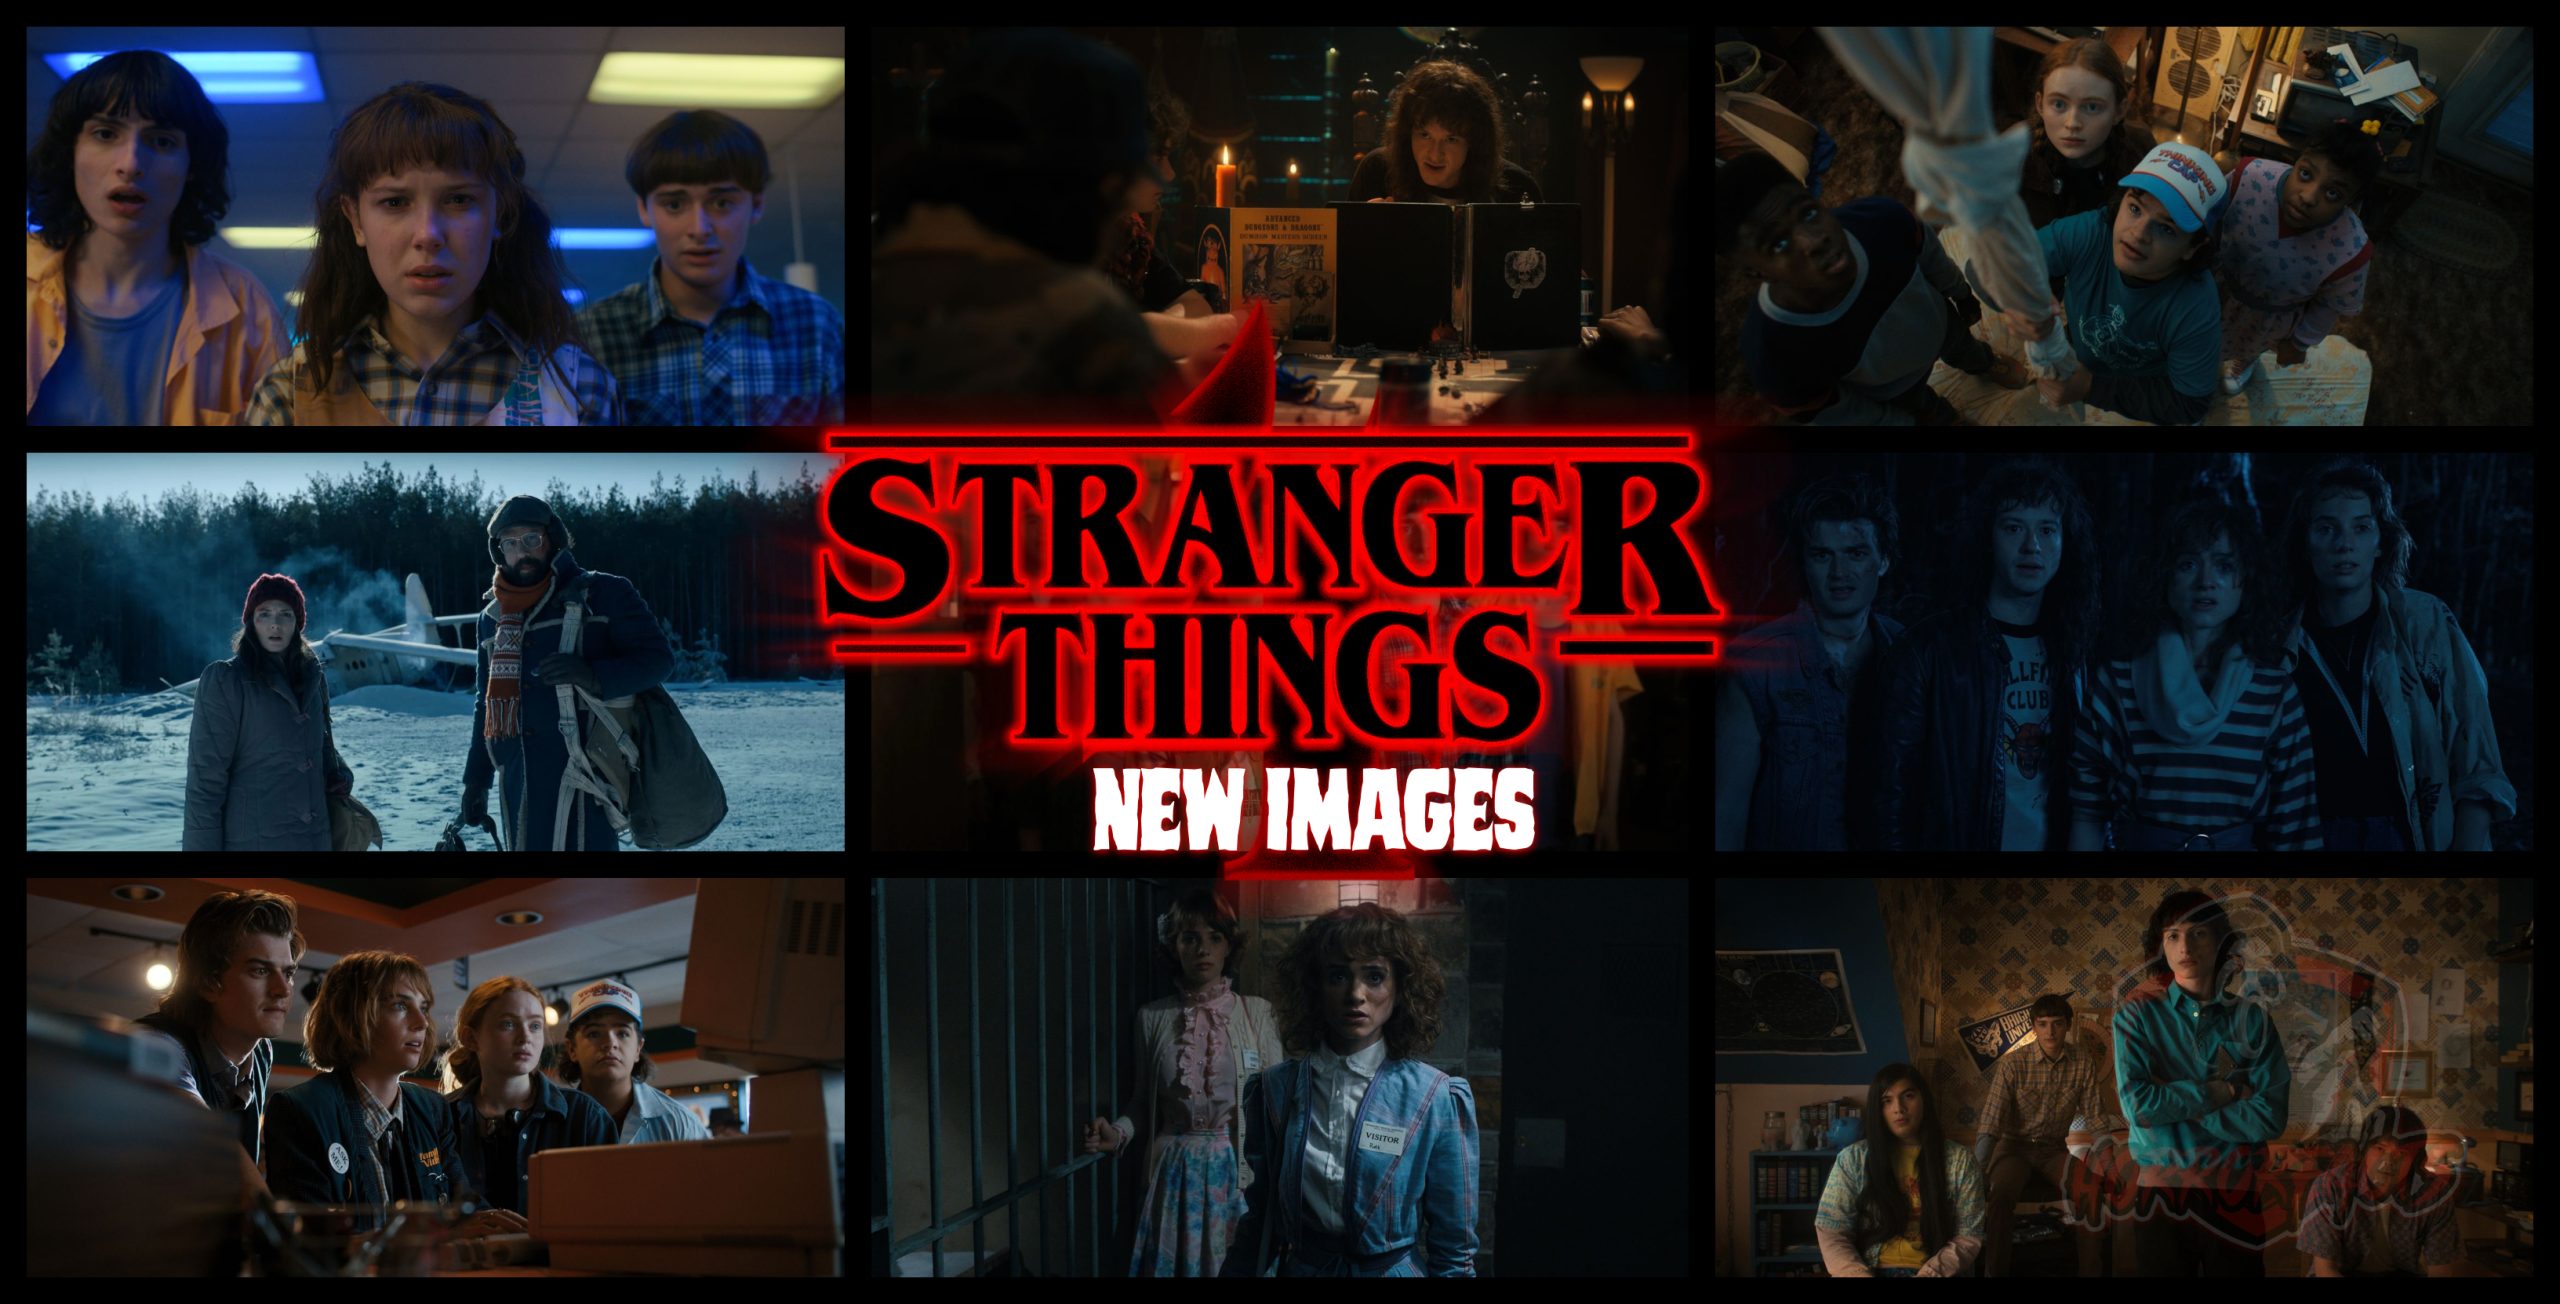 14 Cool Stranger Things Wallpapers for iPhone 2022 Updated